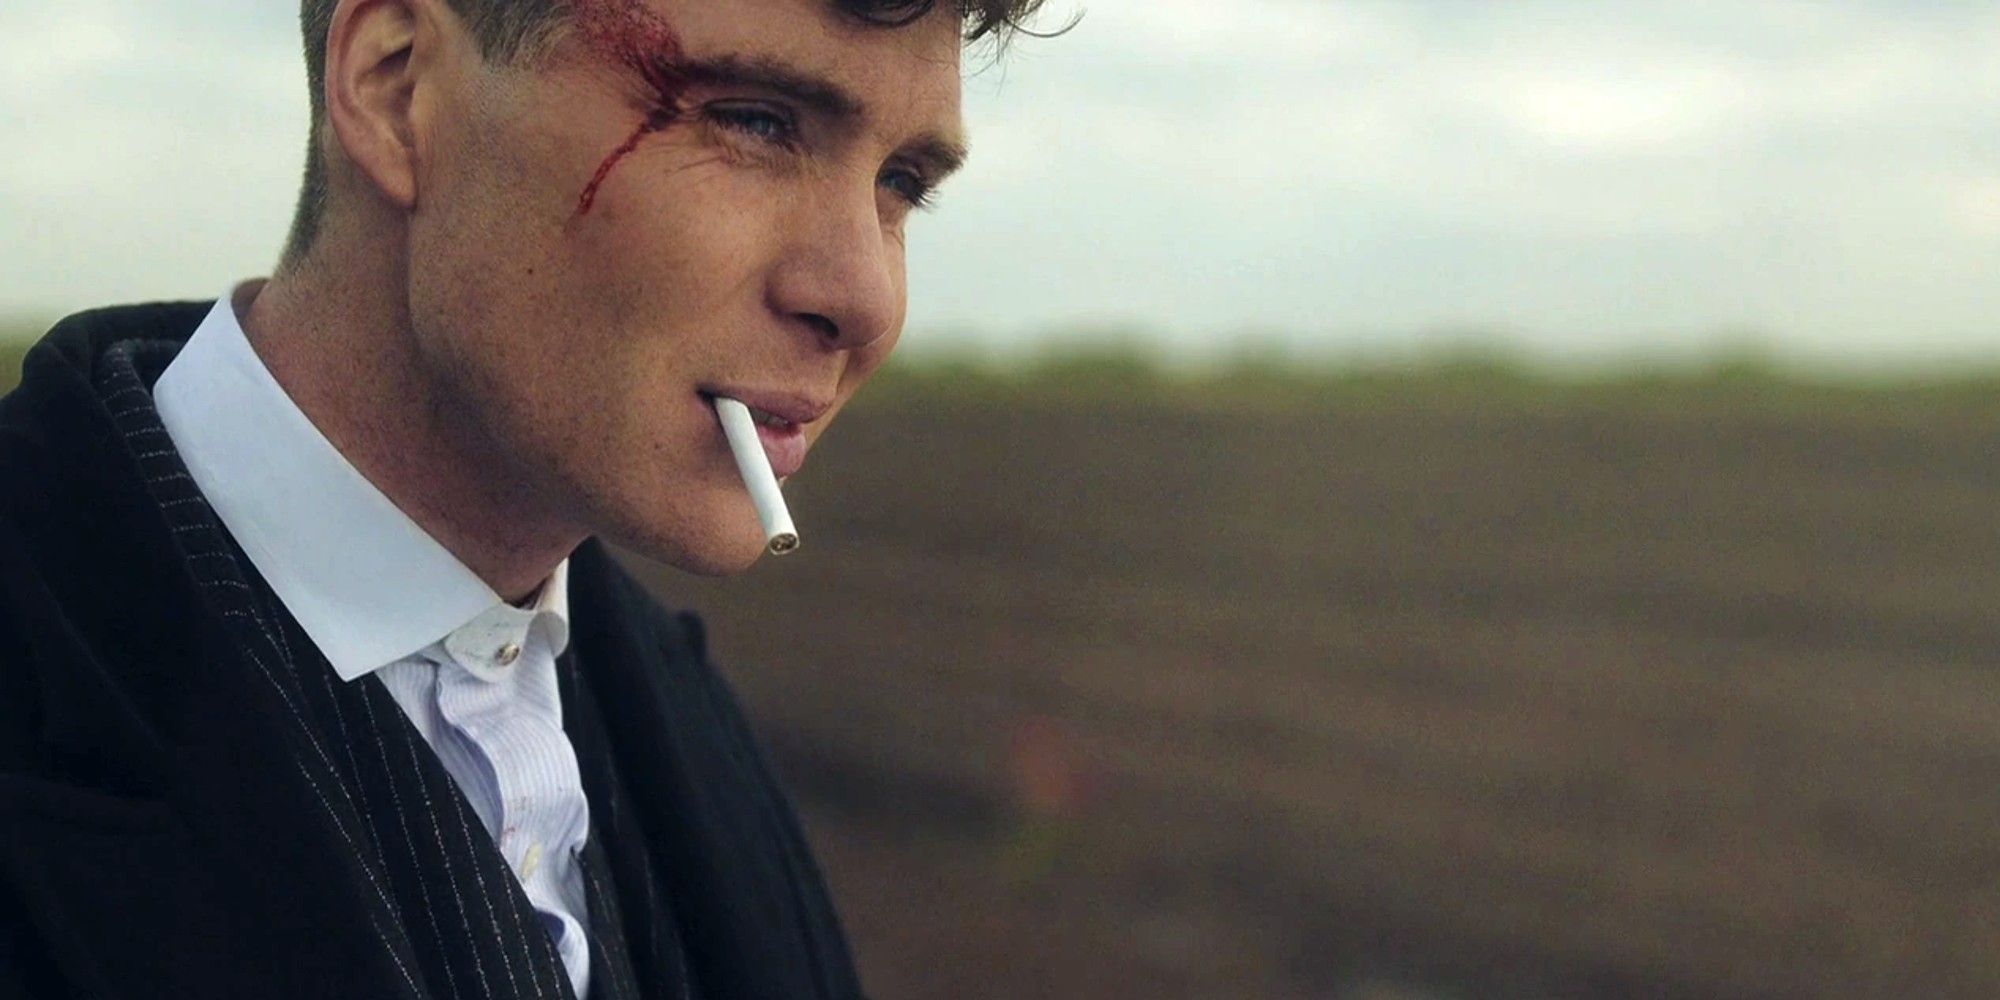 Cillian Murphy smoking his last cigarette as Tommy Shelby in Peaky Blinders